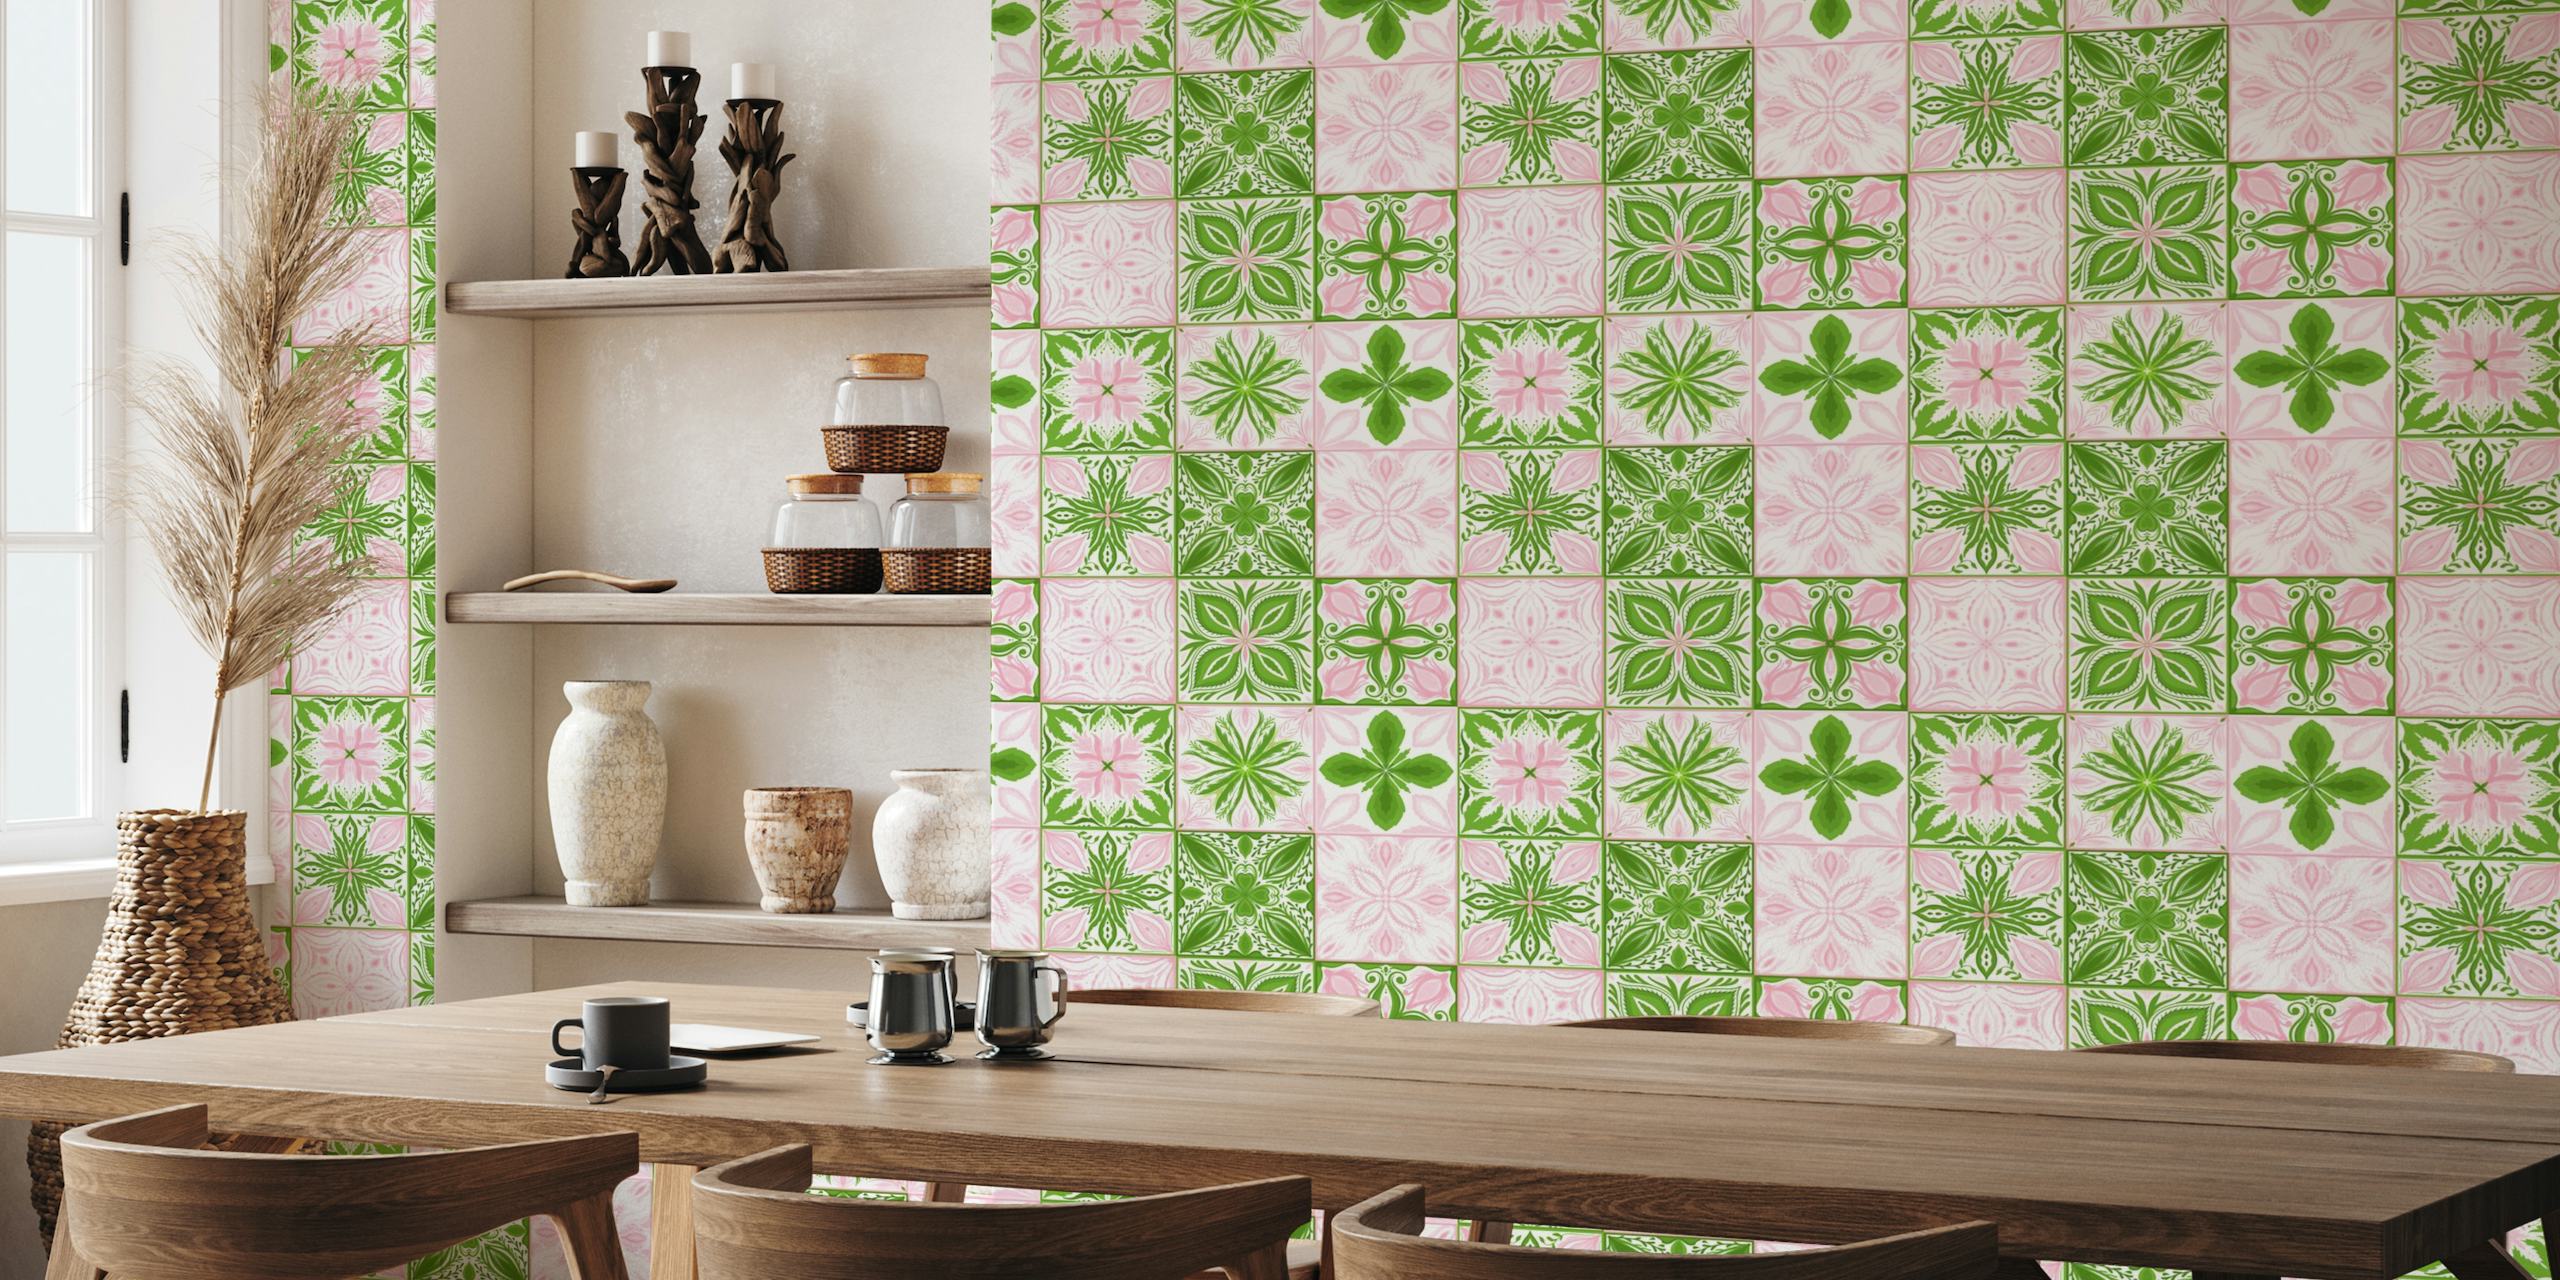 Ornate tiles in pink and green tapeta